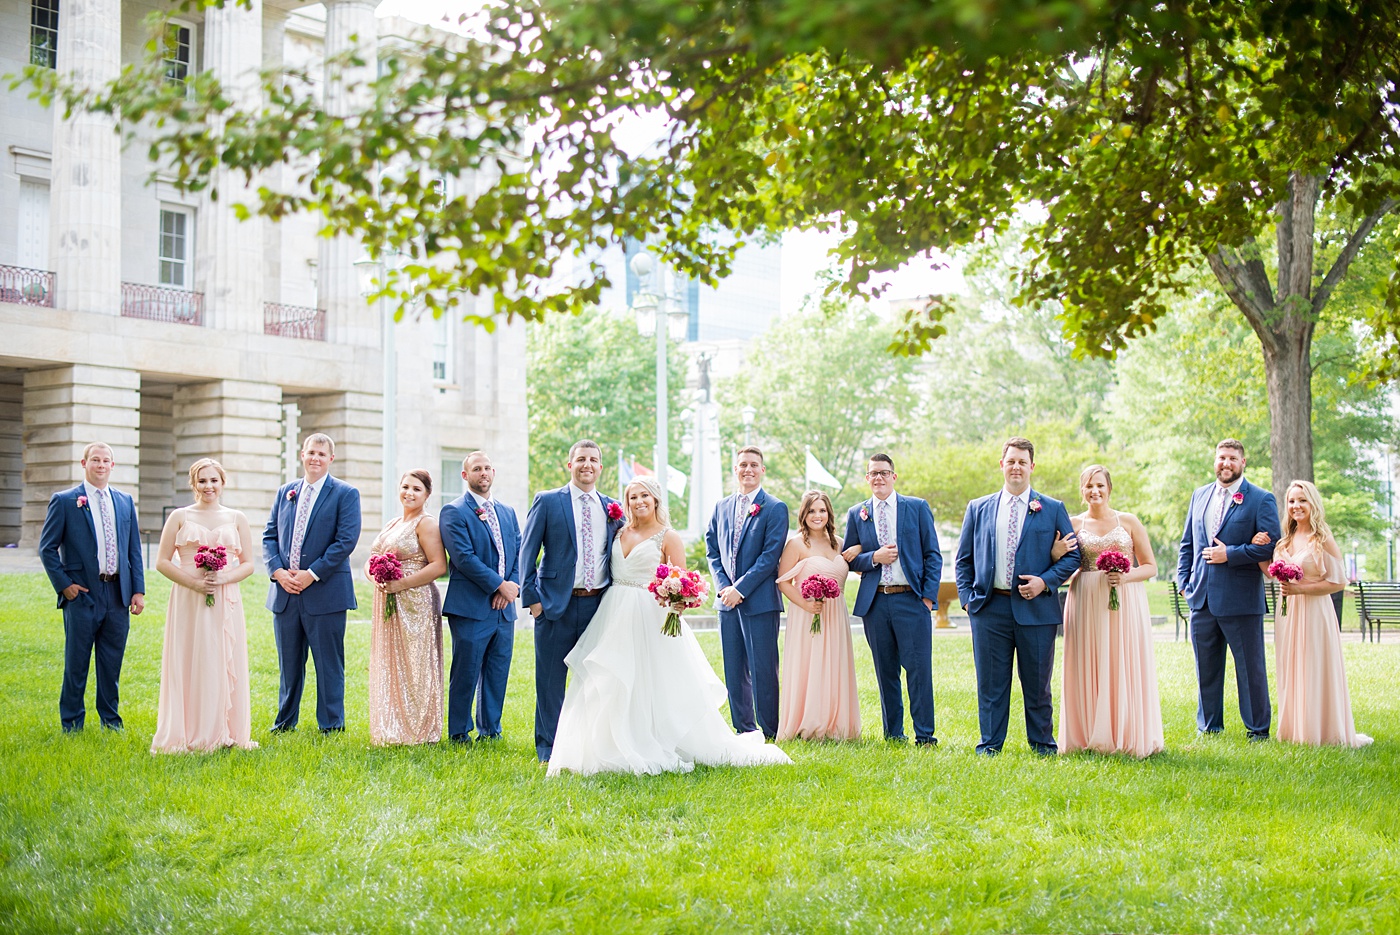 Raleigh wedding photographer, Mikkel Paige Photography, pictures of mismatched pink bridesmaids + groomsmen in blue suits with floral ties in downtown Raleigh, North Carolina at the event venue The Stockroom at 230, The Glass Box, and capital building. Their hot pink peony + carnation bouquets were perfect for a spring May celebration. #MikkelPaige #DowntownRaleigh #RaleighWedding #RaleighVenue #TheStockroomat230 #capitalcity #peonies #carnations #pinkbridesmaids #bridalpartyphotos #weddingparty